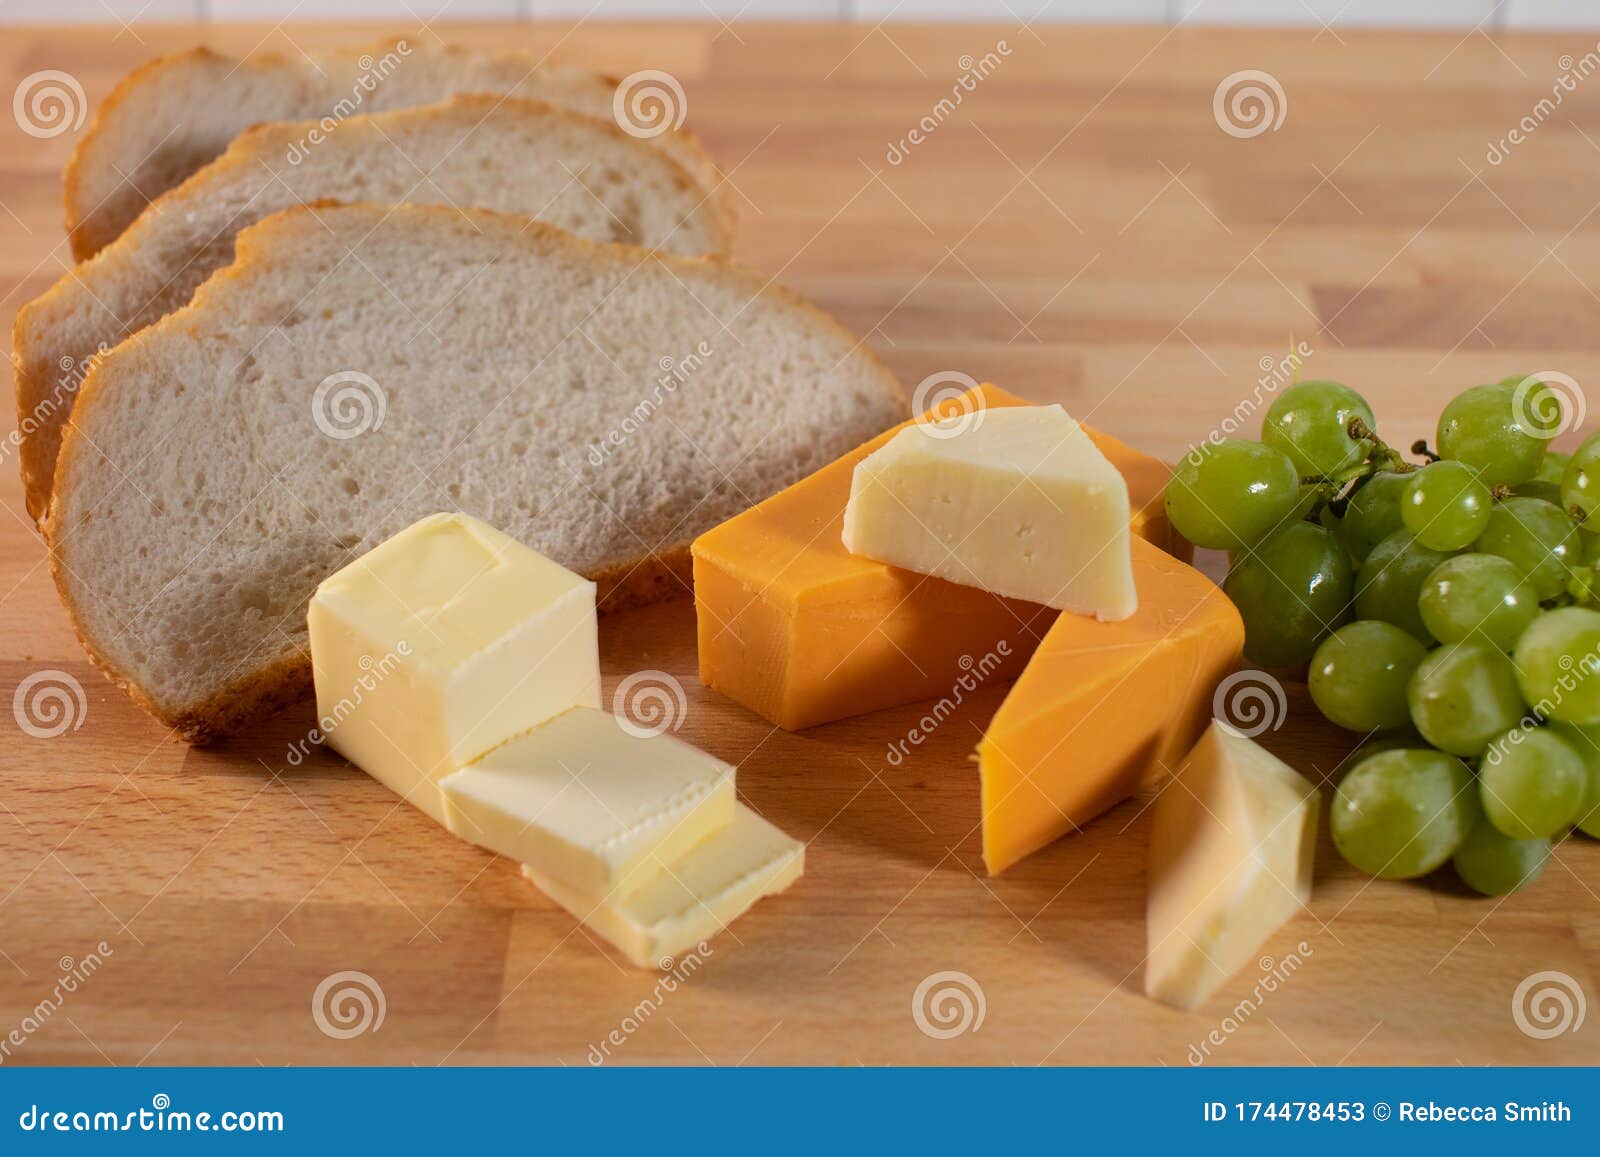 Overview Sliced Bread Butter Asserted Cheeses Green Grapes Stock Image Image Of Bread Food